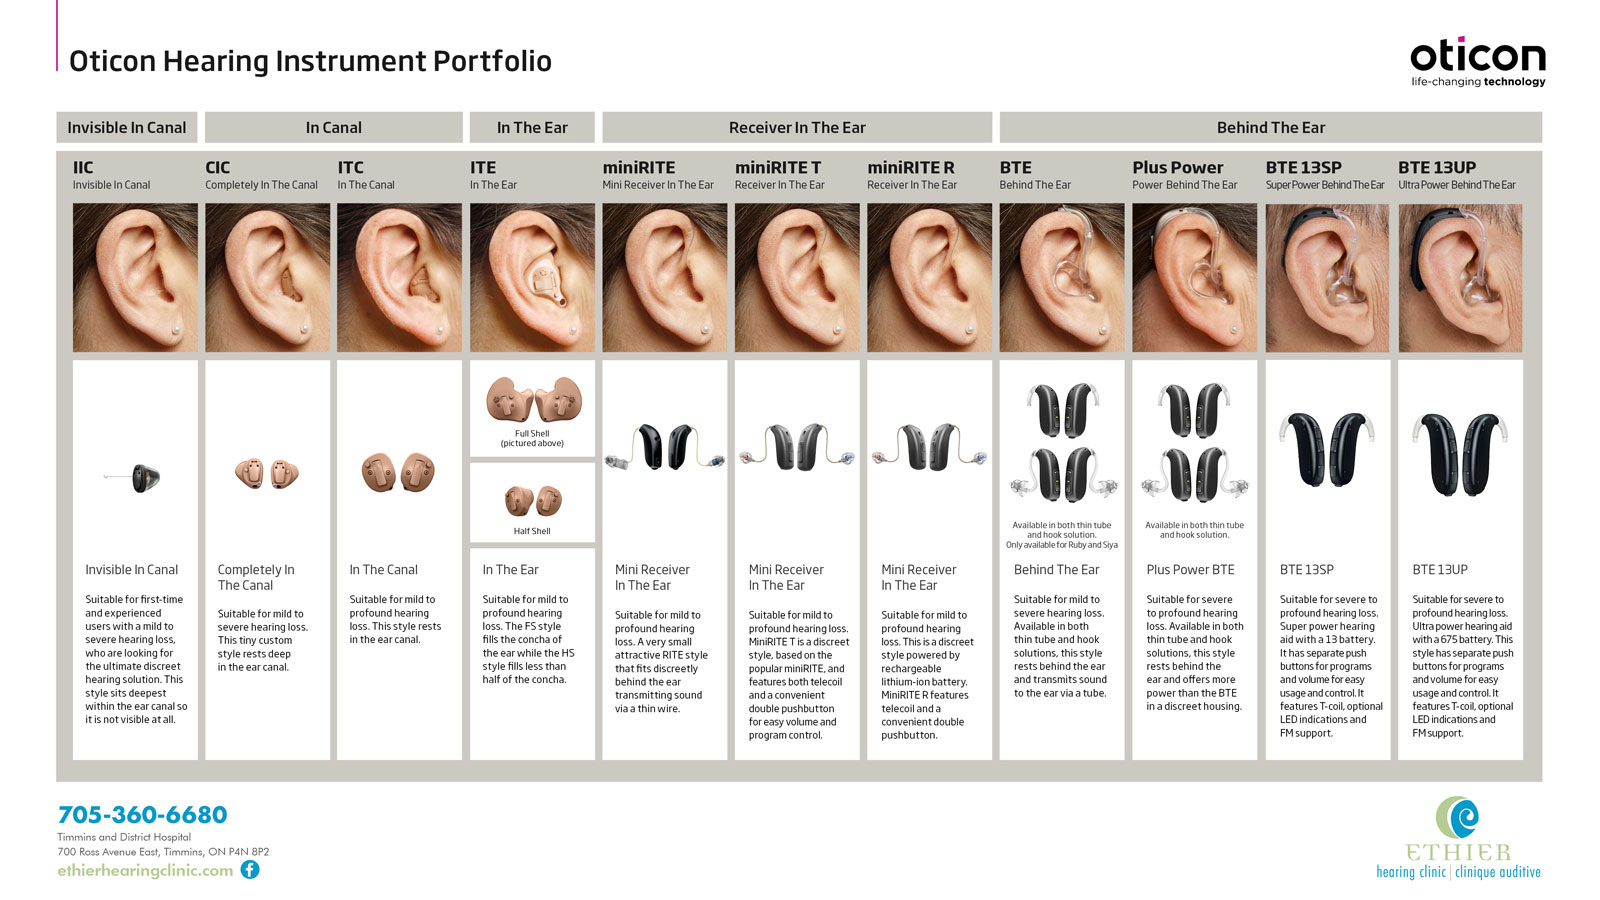 Overview of all the different hearing aids available